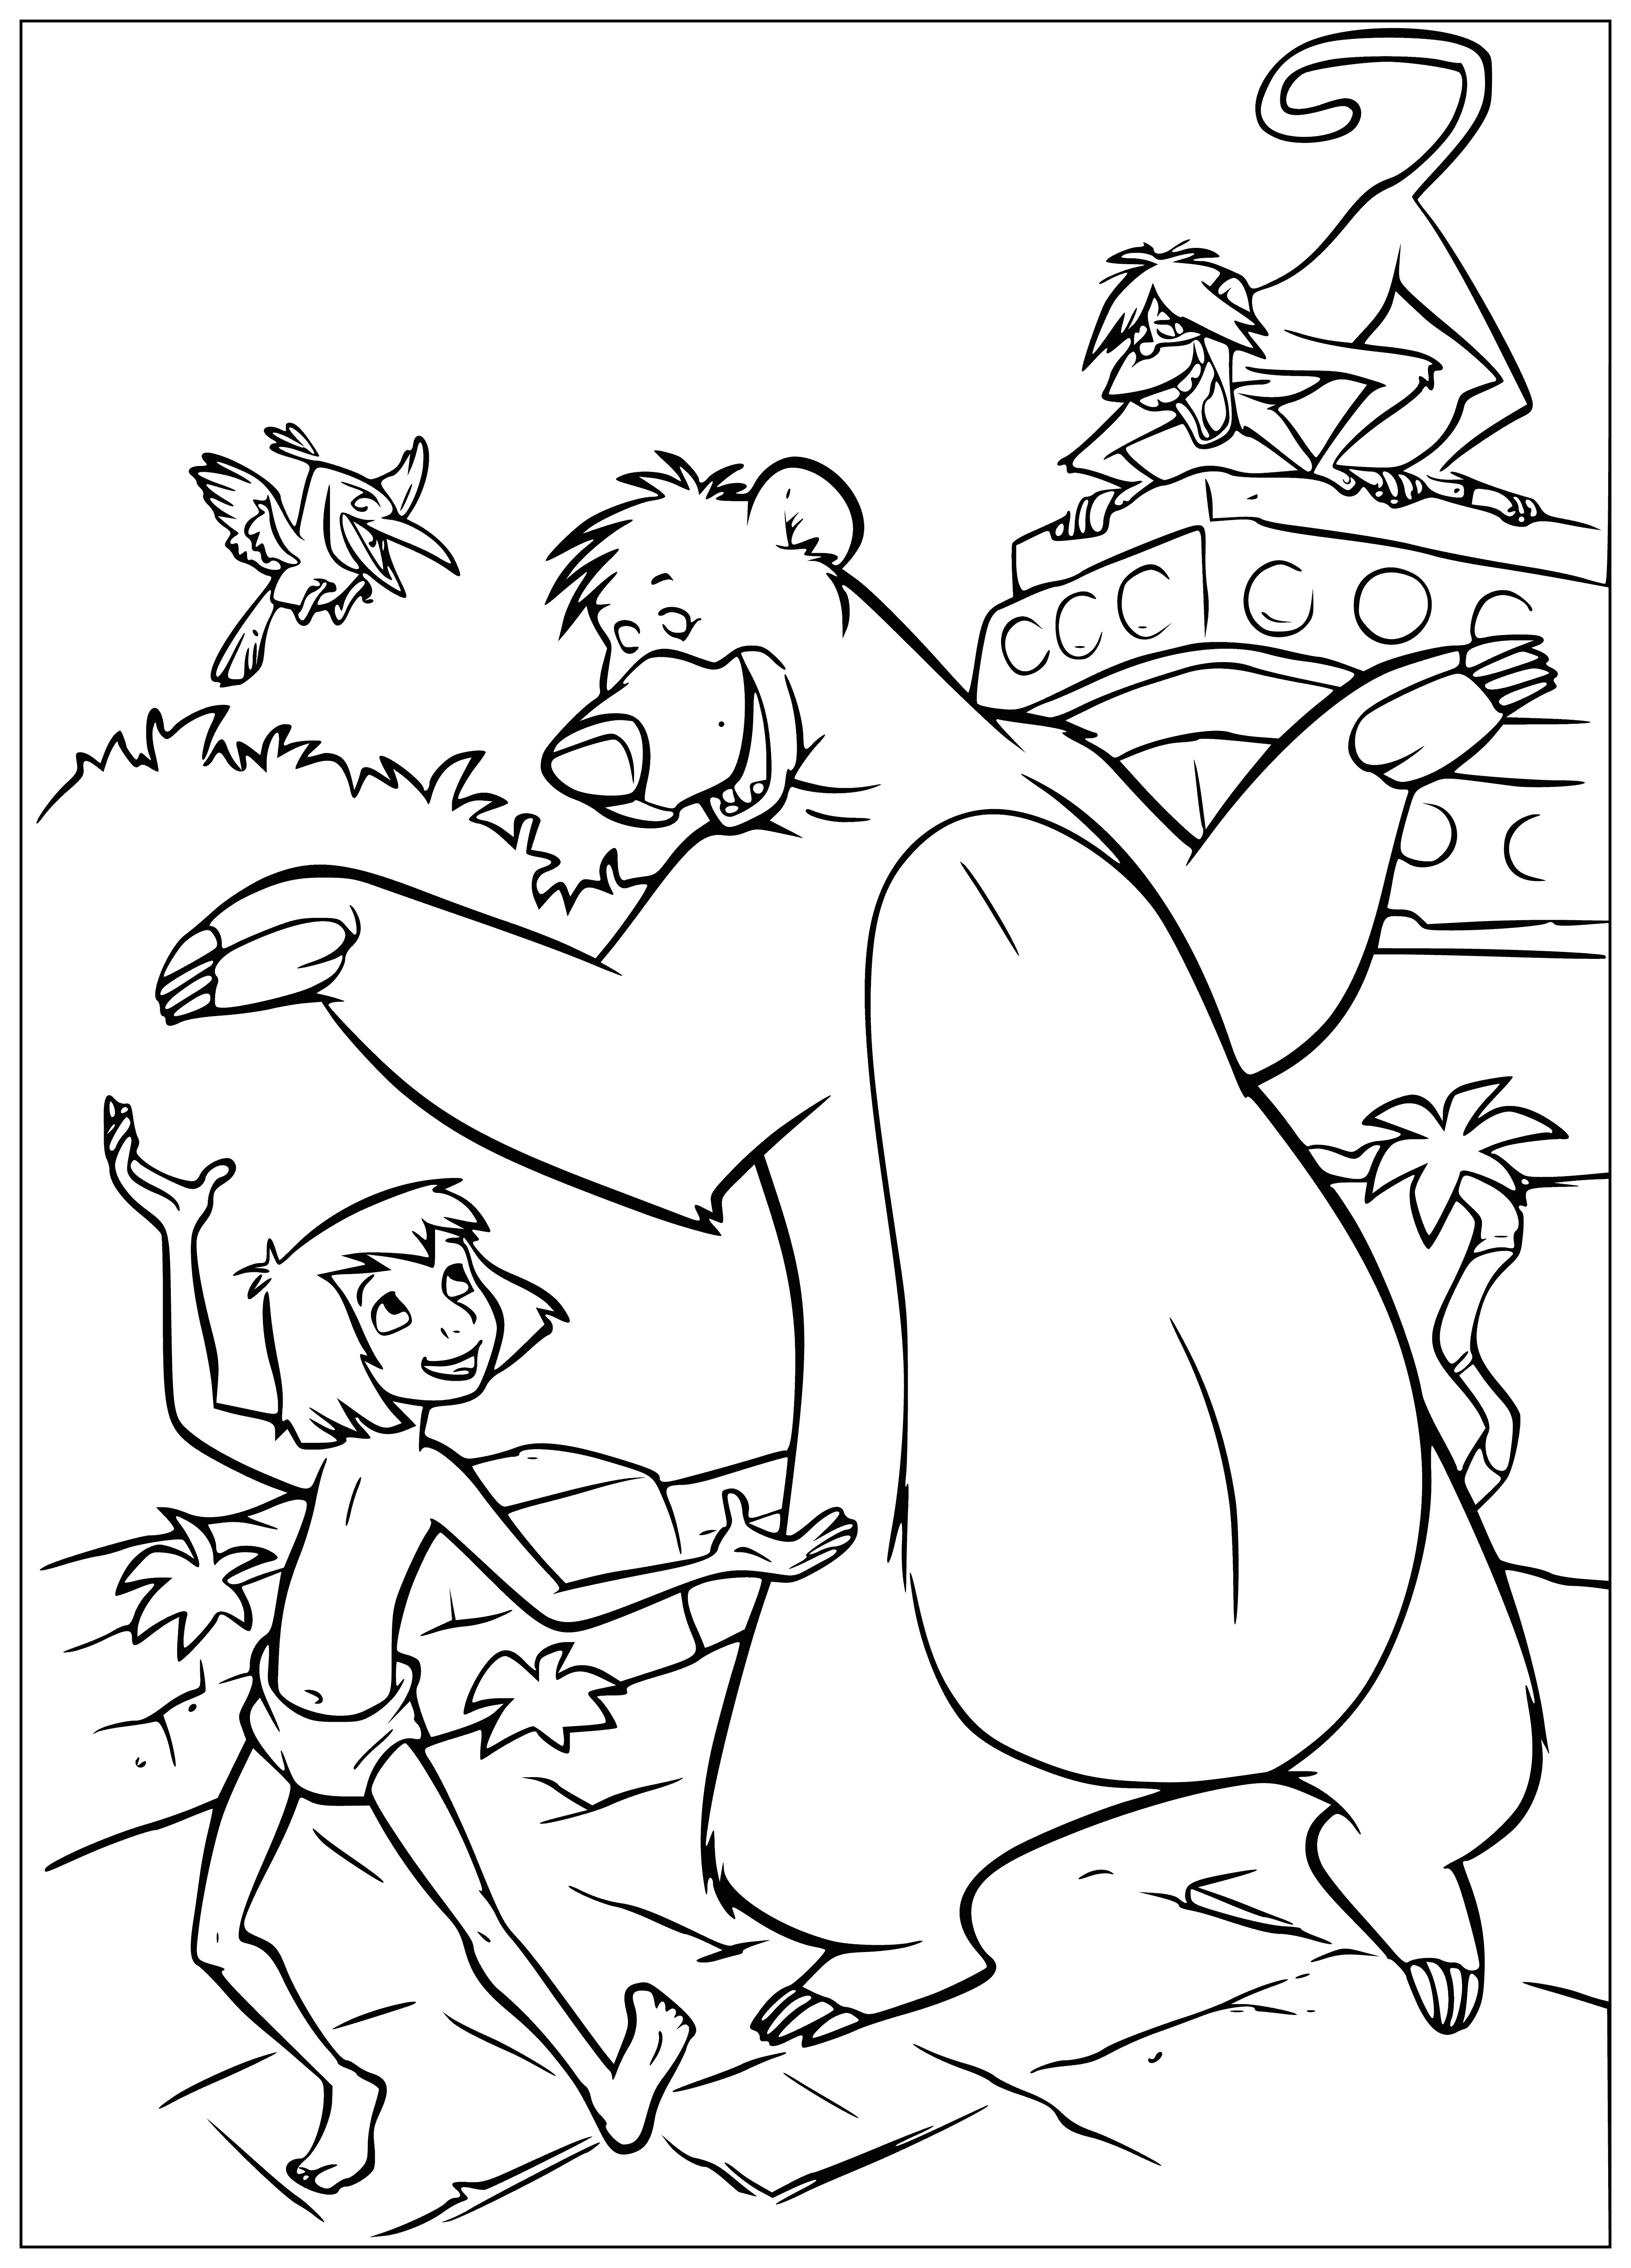 coloring page: Fun bear is dancing surrounded by a happy crew of animals; tigers, monkeys and elephants, clapping and cheering him on.